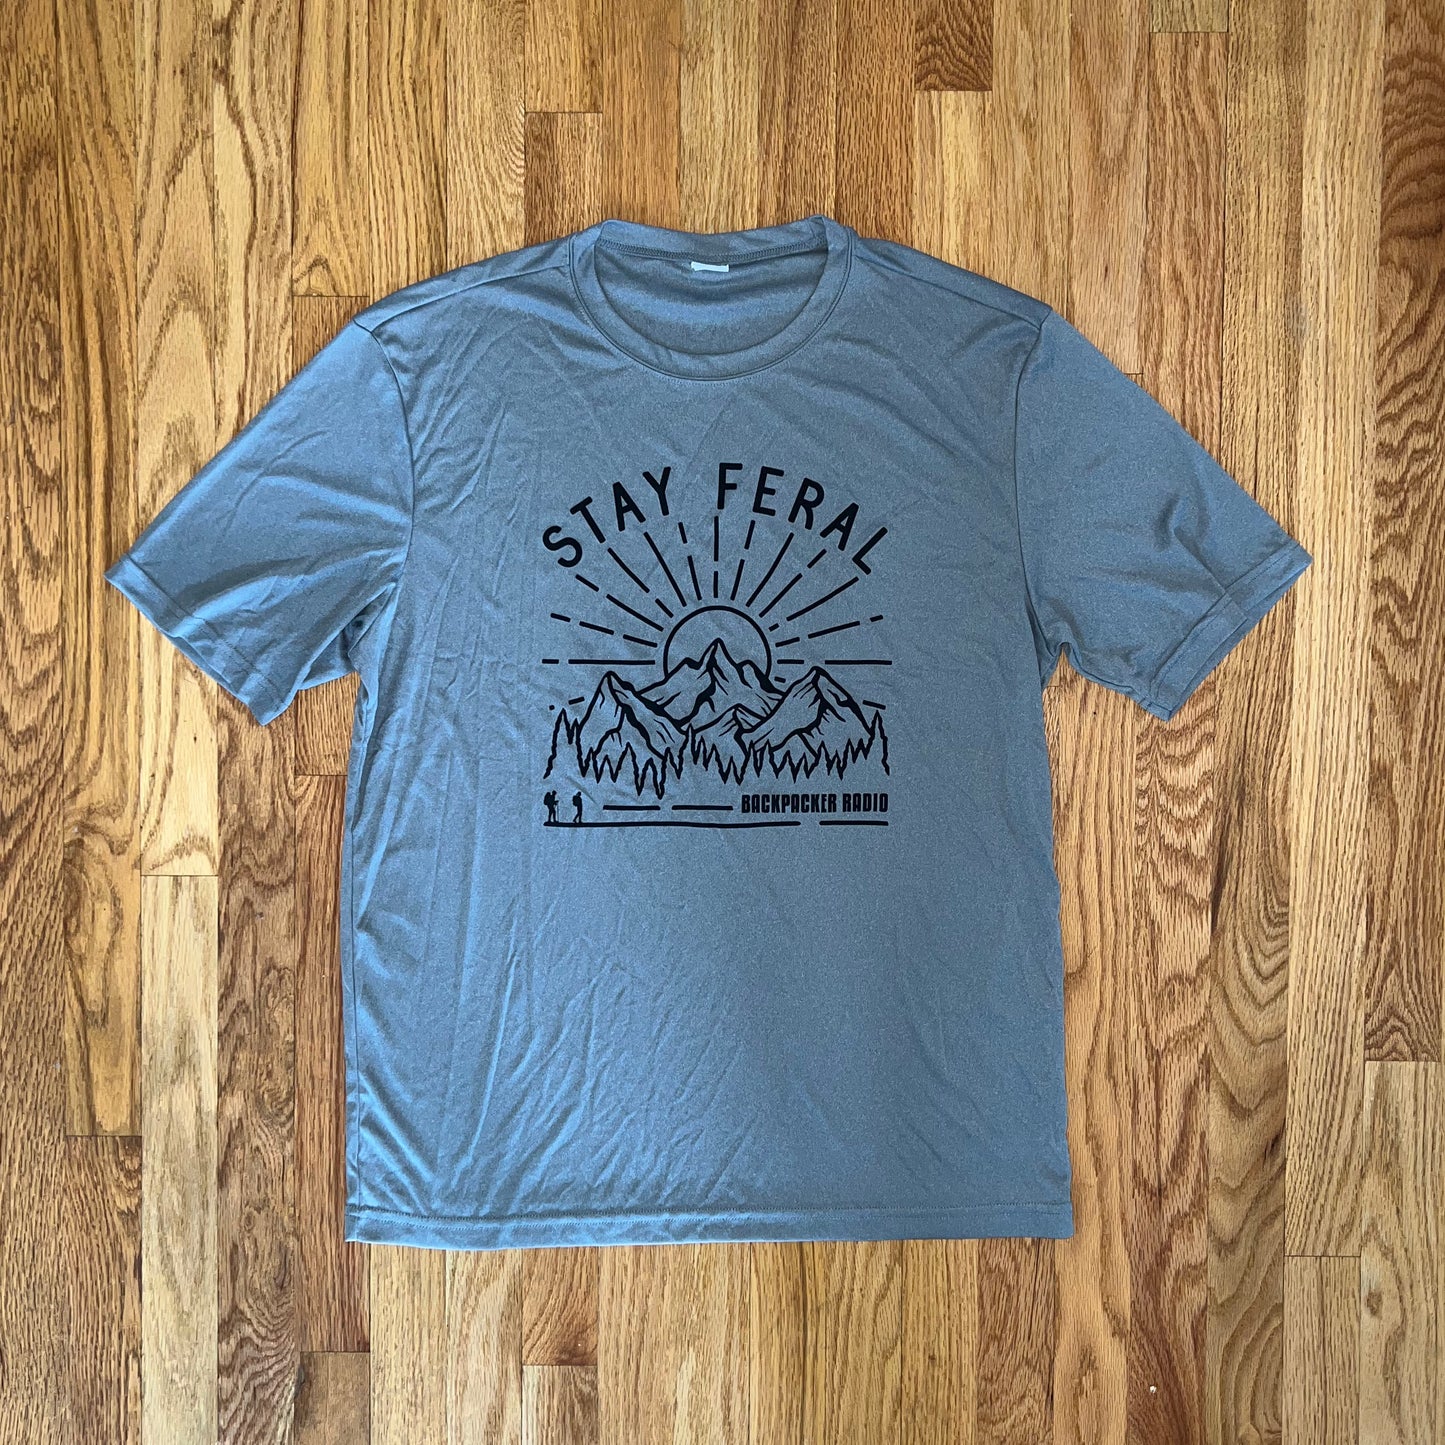 Backpacker Radio - Stay Feral Technical Tee